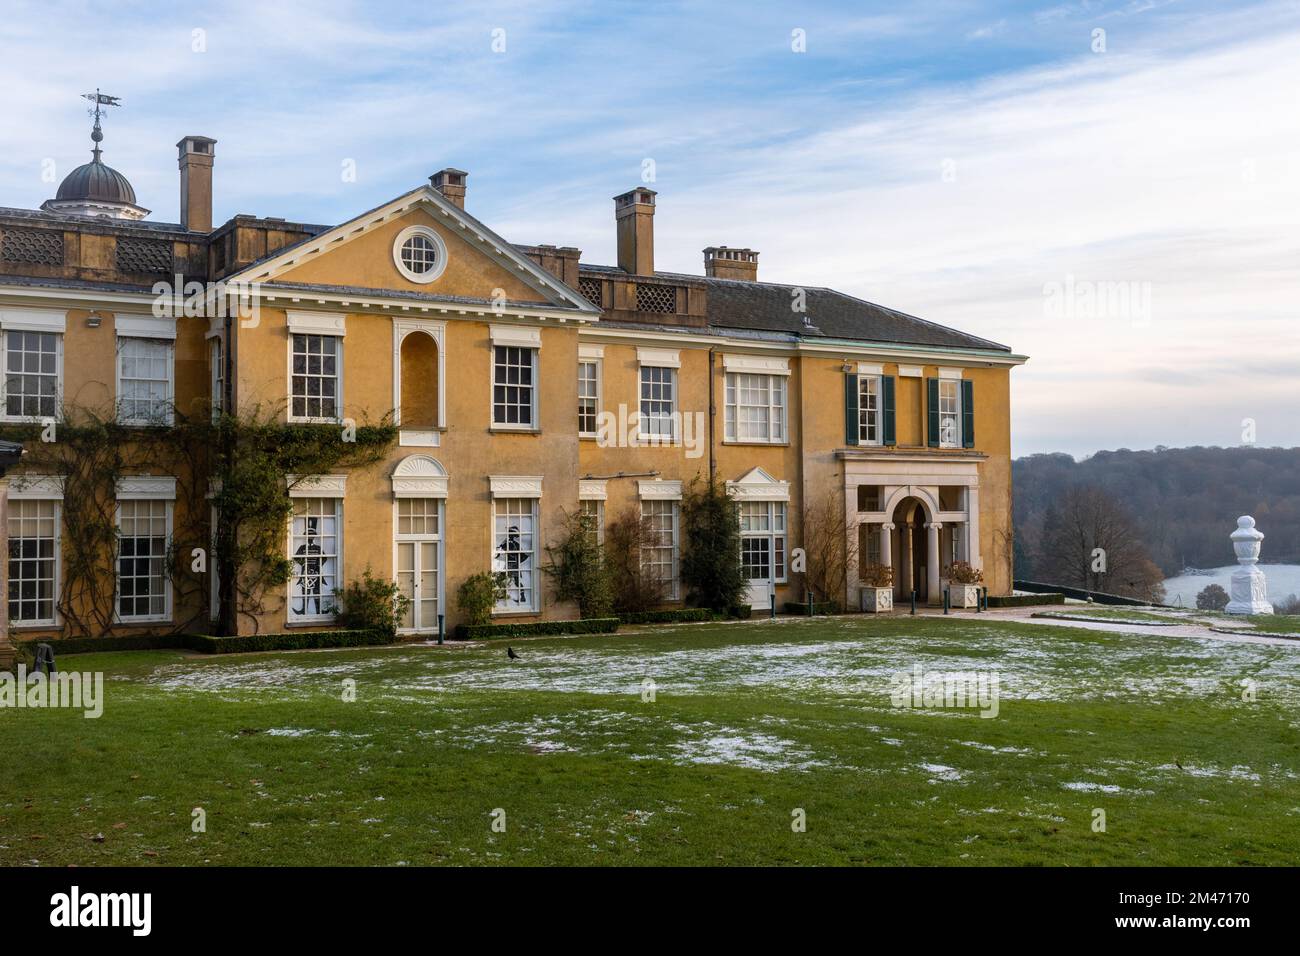 Polesden Lacey House in Surrey, England, UK, during winter Stock Photo